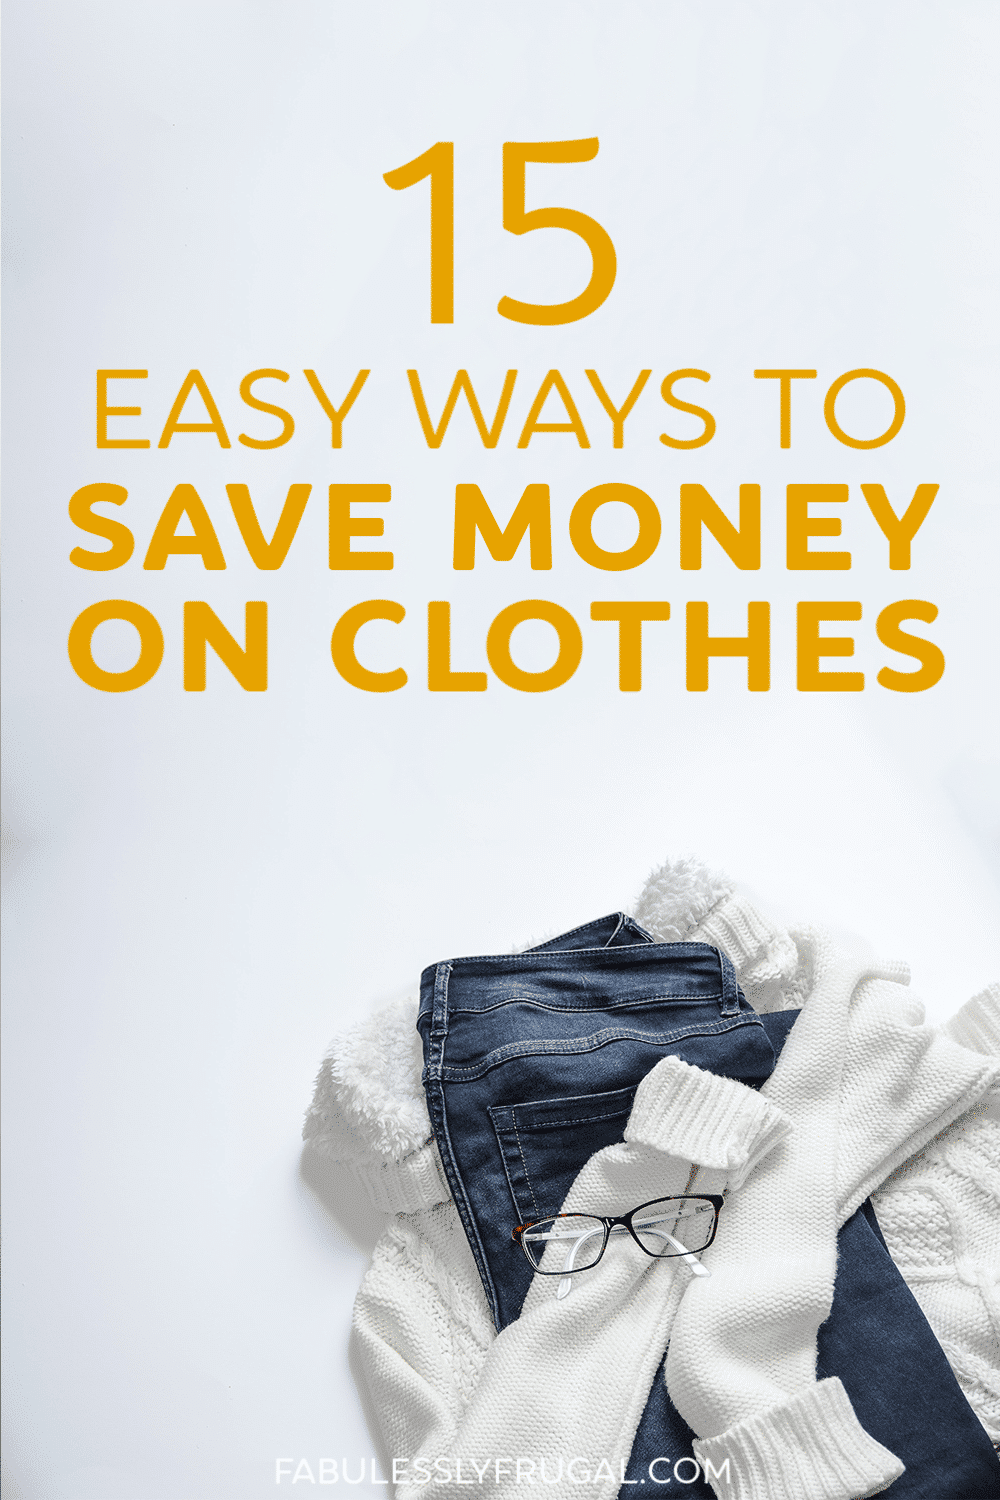 Ways to save money on clothes